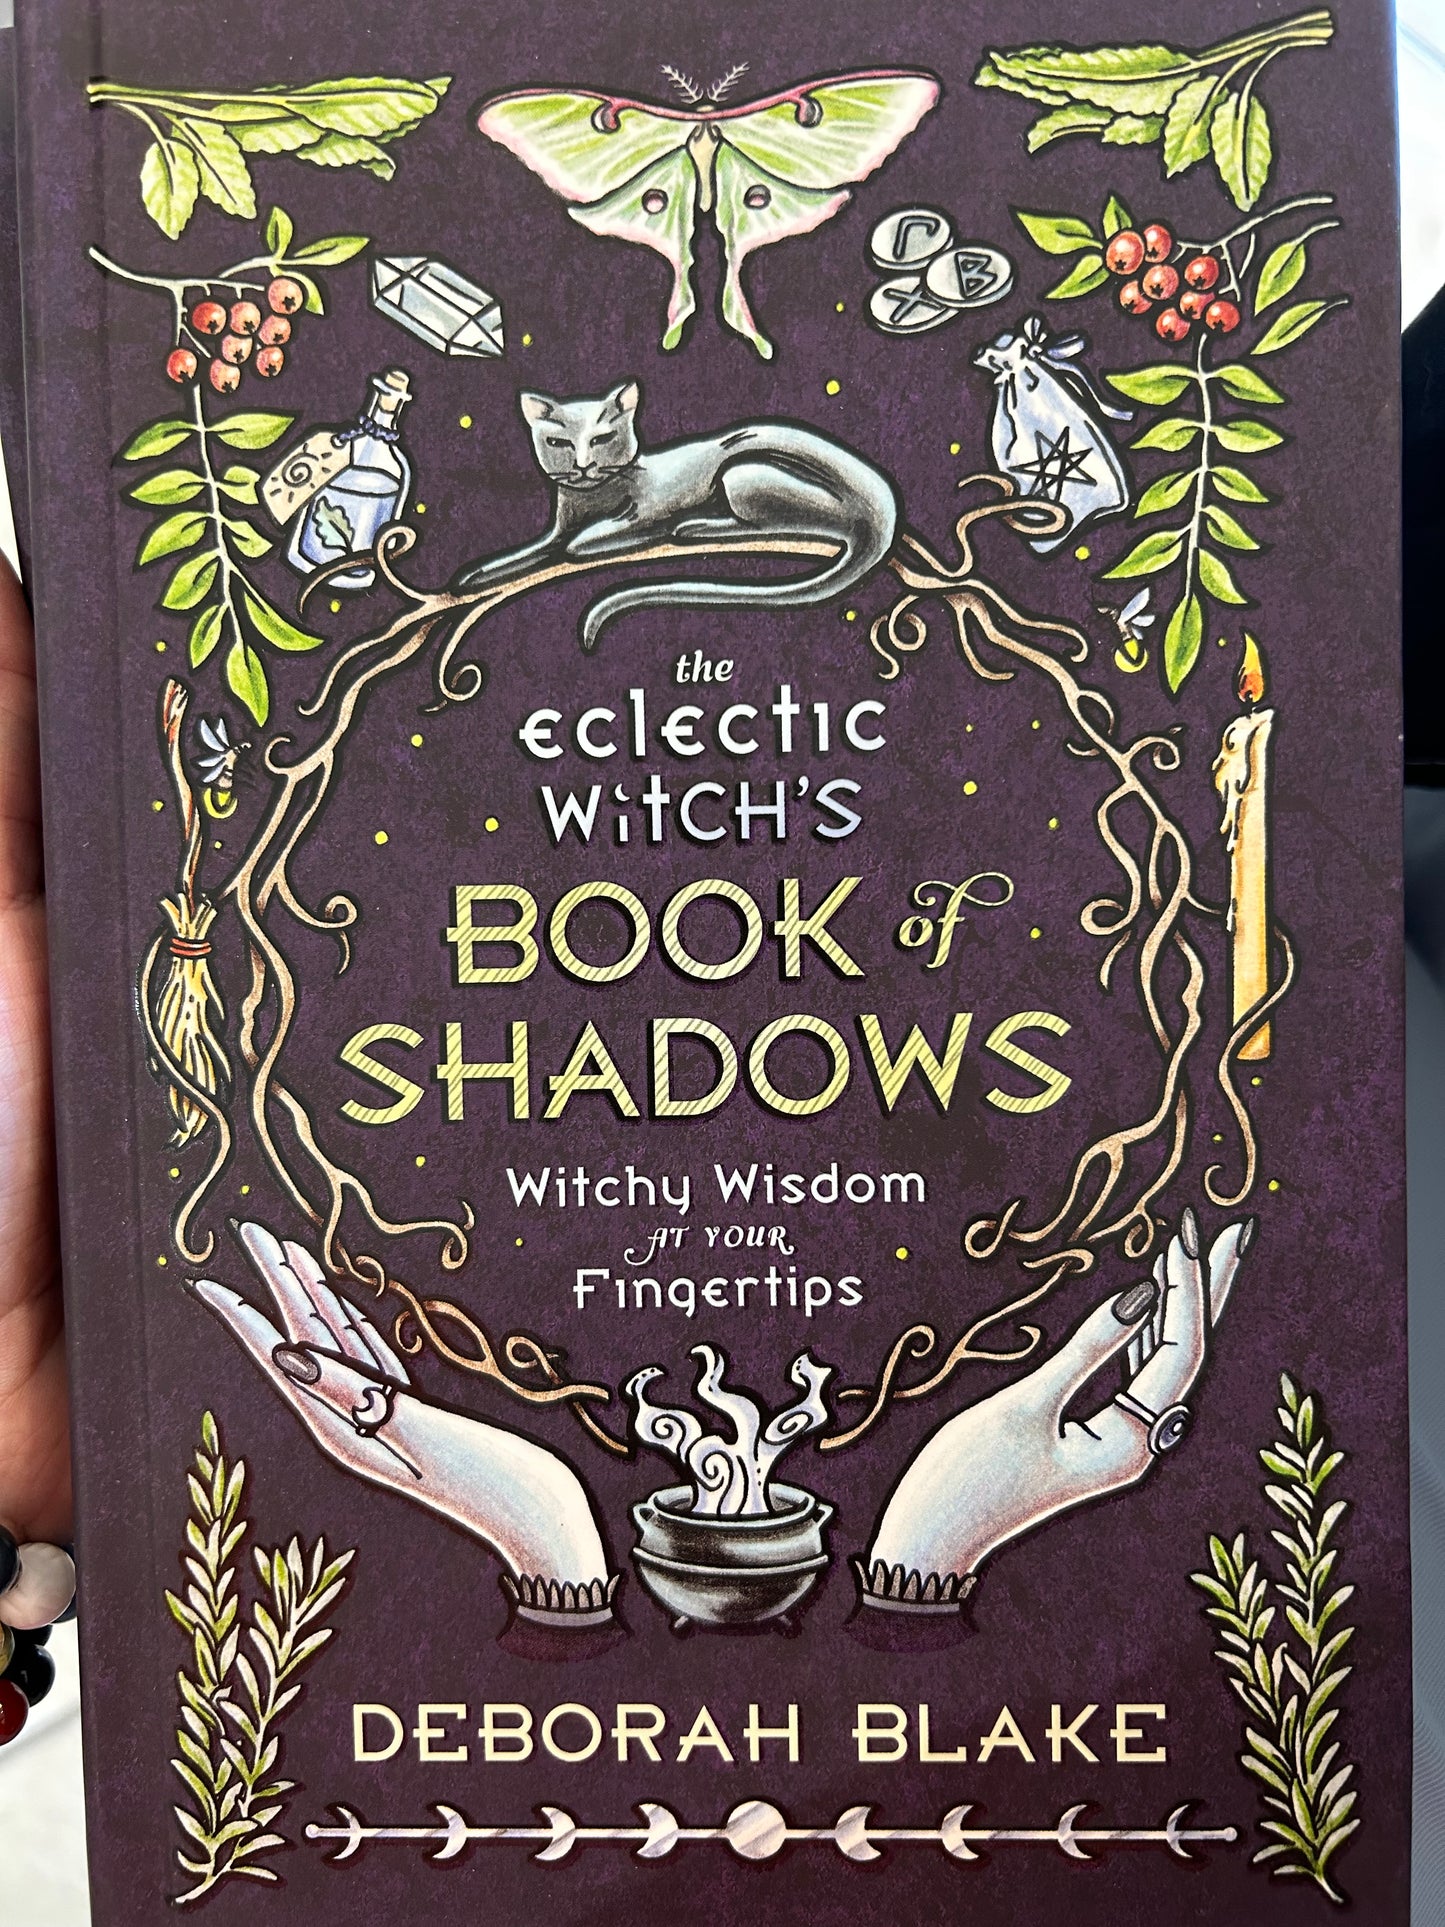 the Eclectic Witch's Book of Shadows by Deborah Blake